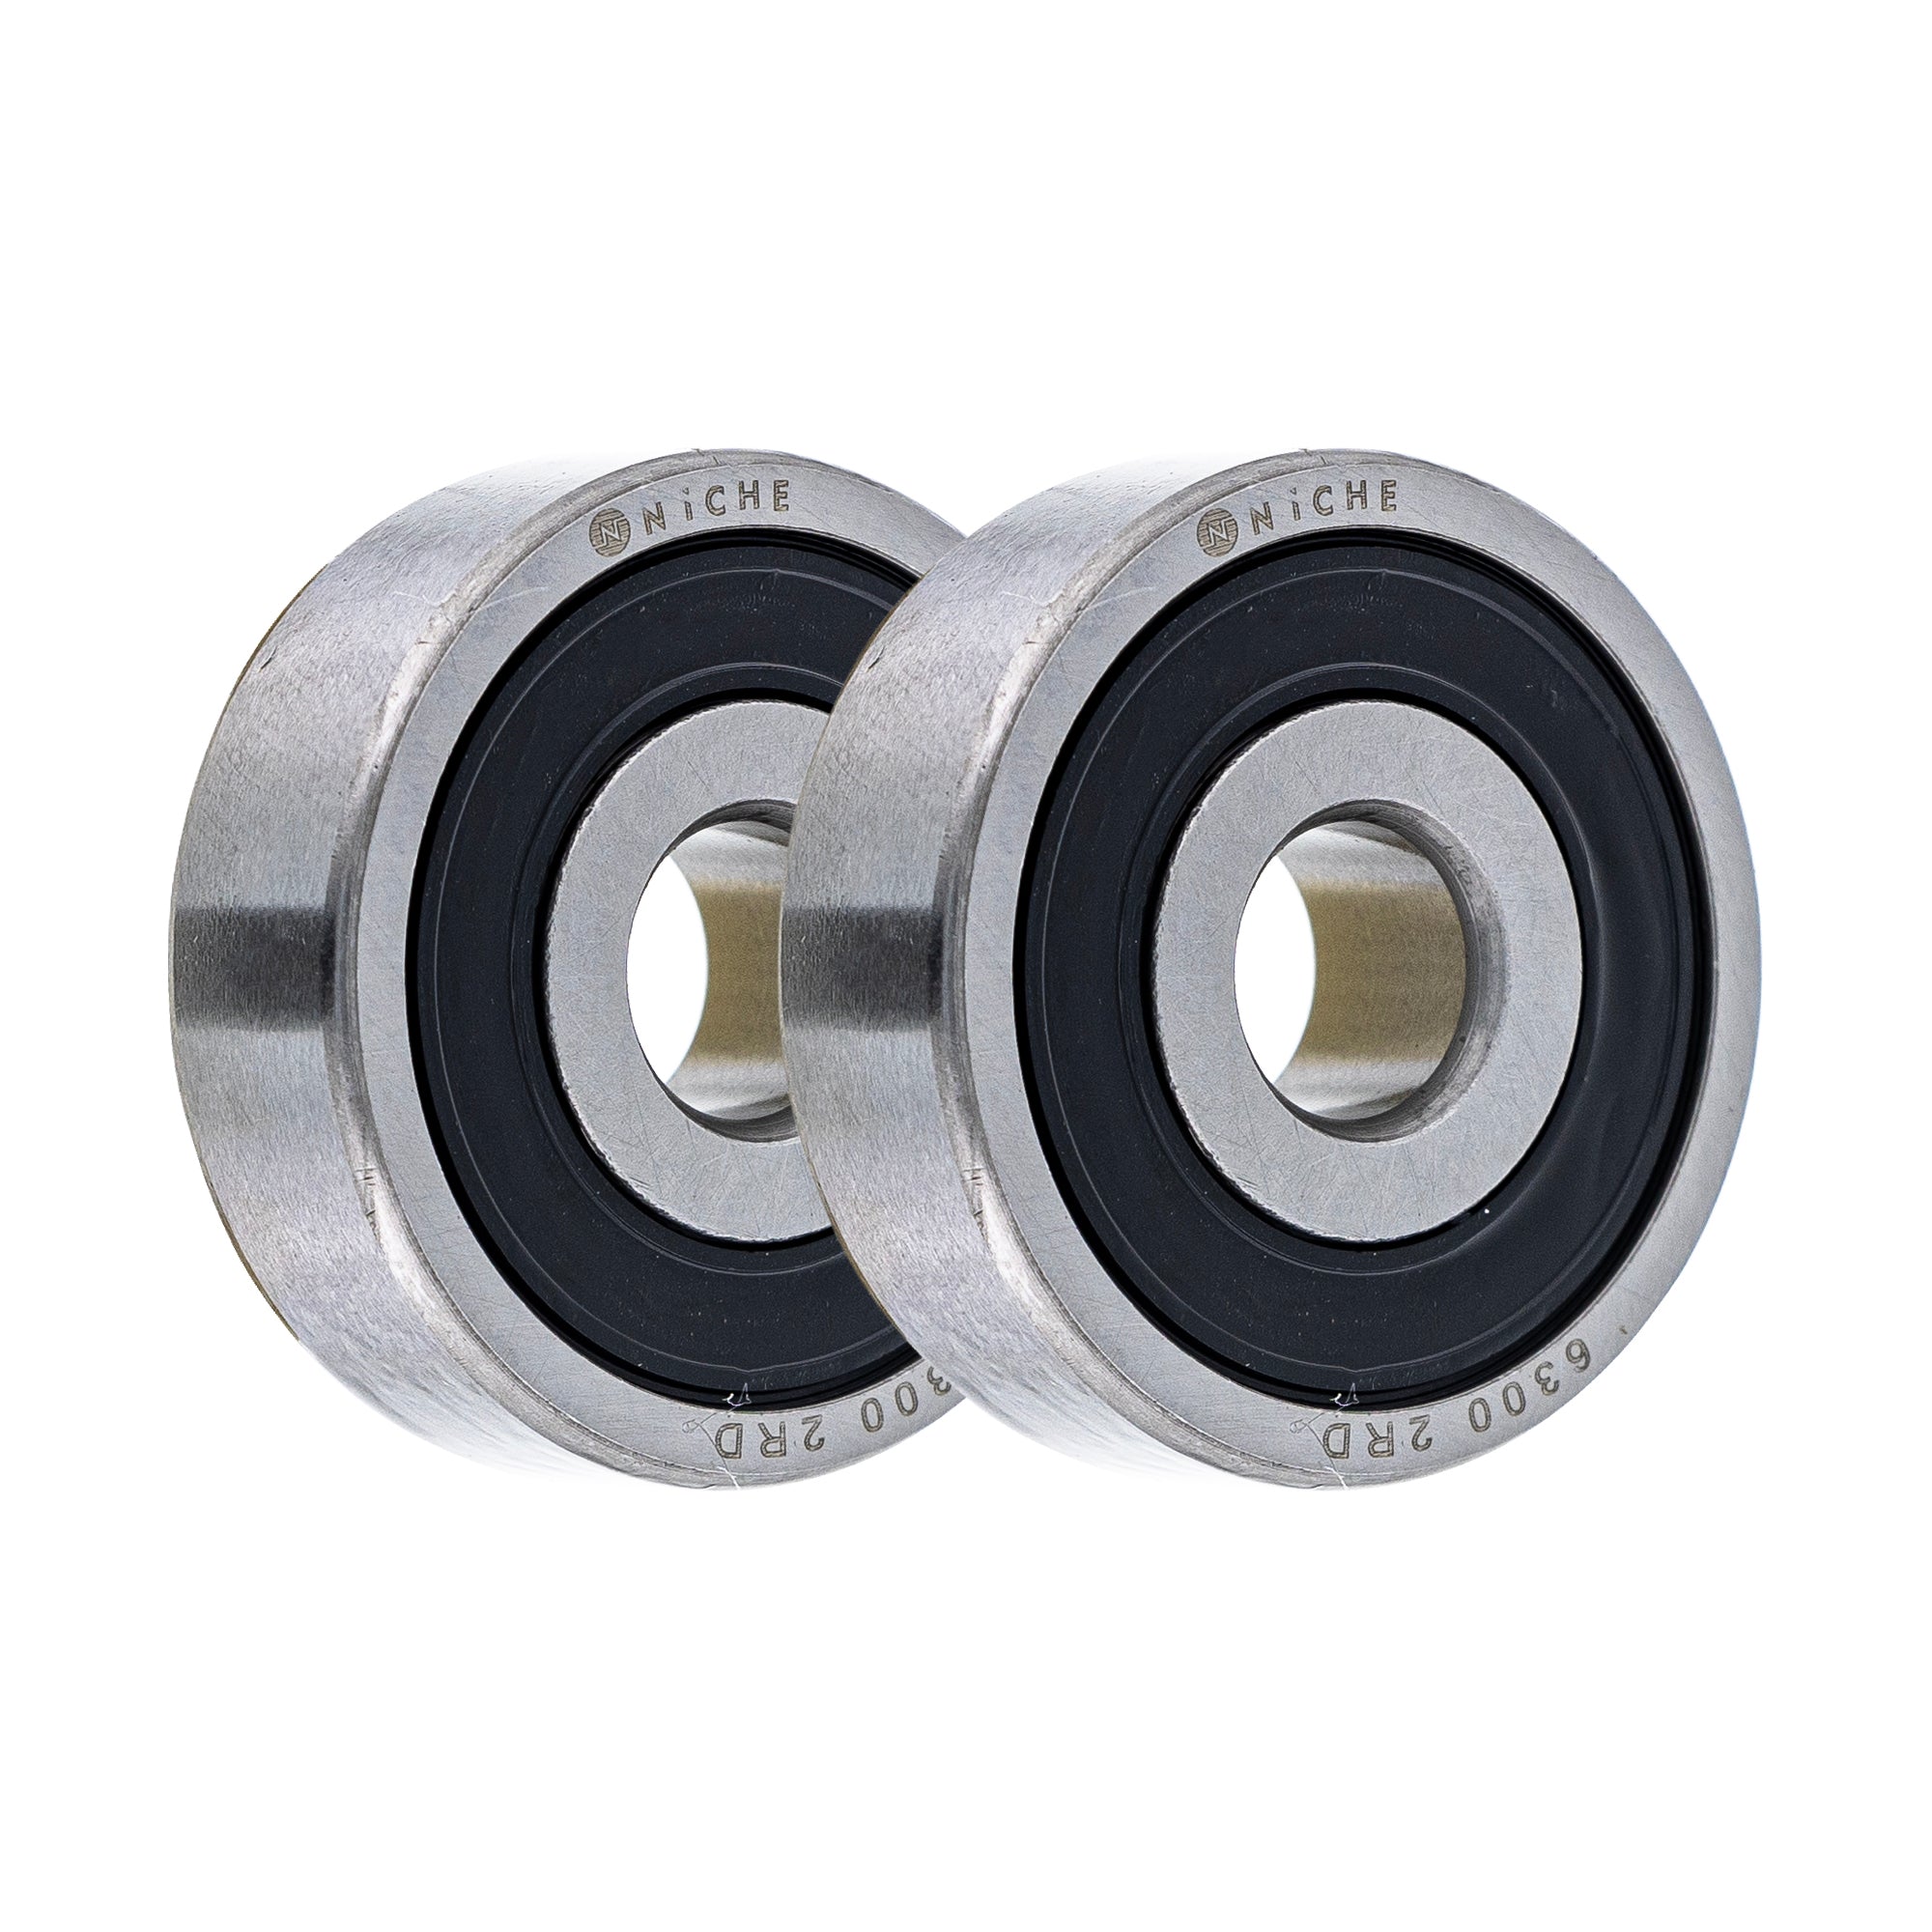 Electric Grade, Single Row, Deep Groove, Ball Bearing Pack of 2 2-Pack for zOTHER RD60 NICHE 519-CBB2331R